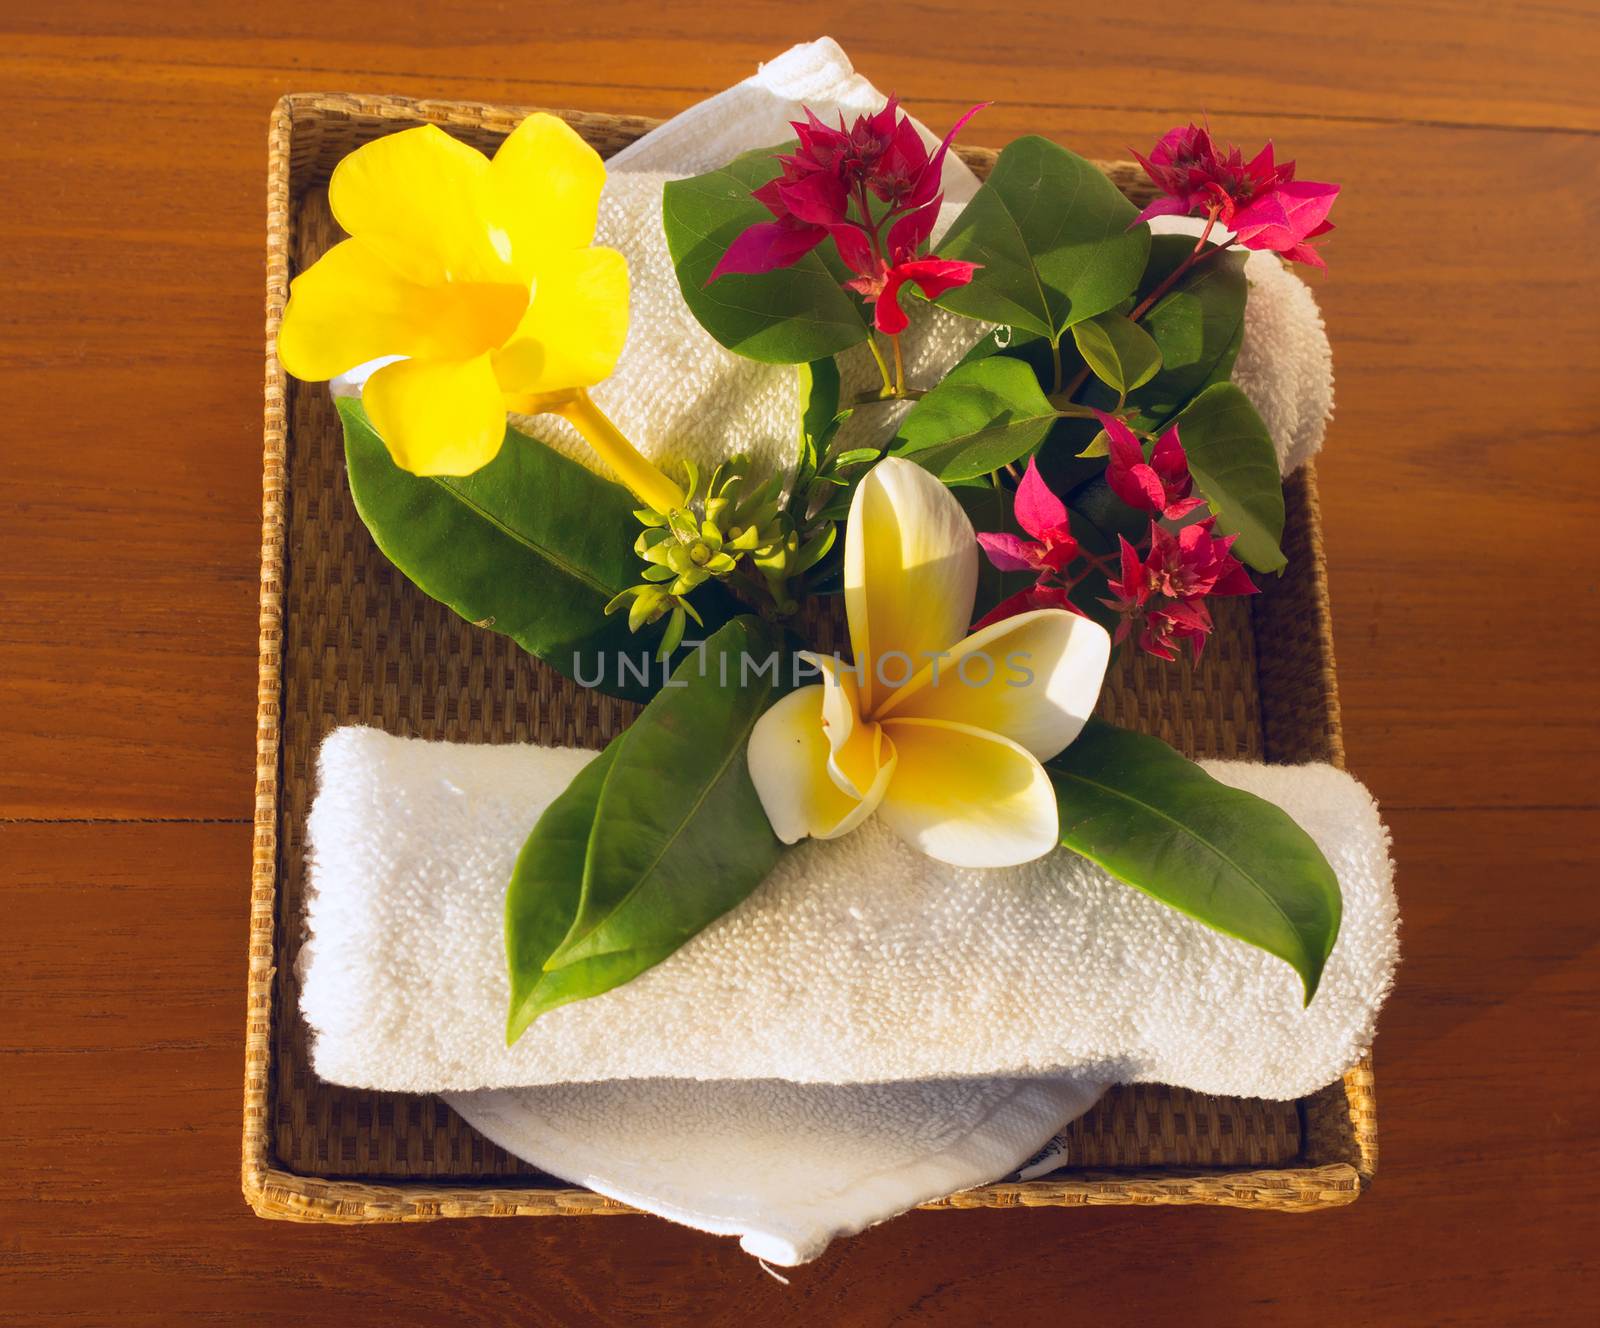 Towels and red, yelow and white flowers